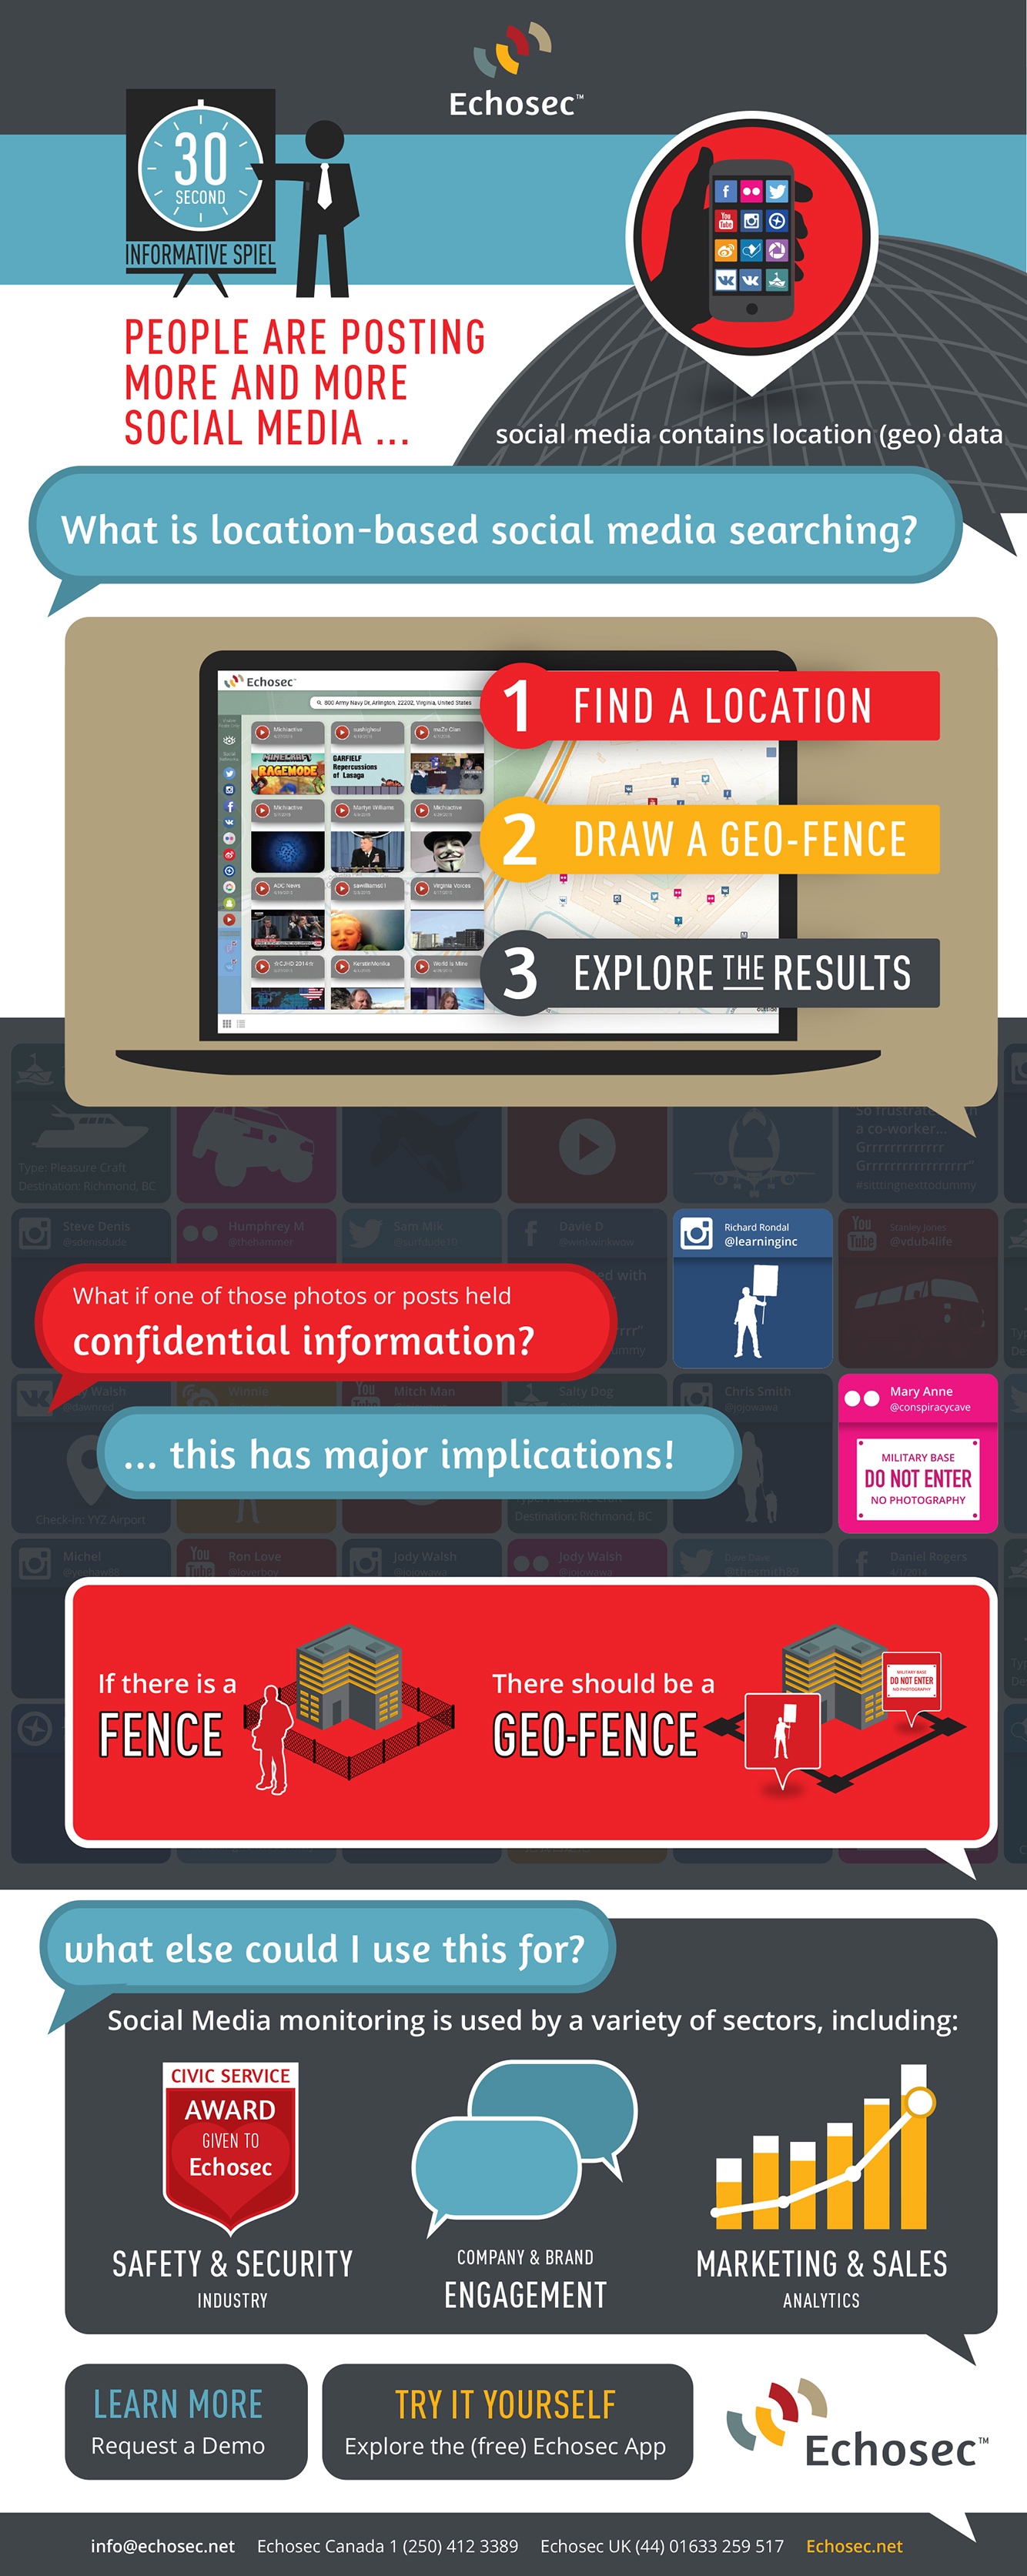 Infographic Echosec What-is-location-based-social-media-searching.jpg